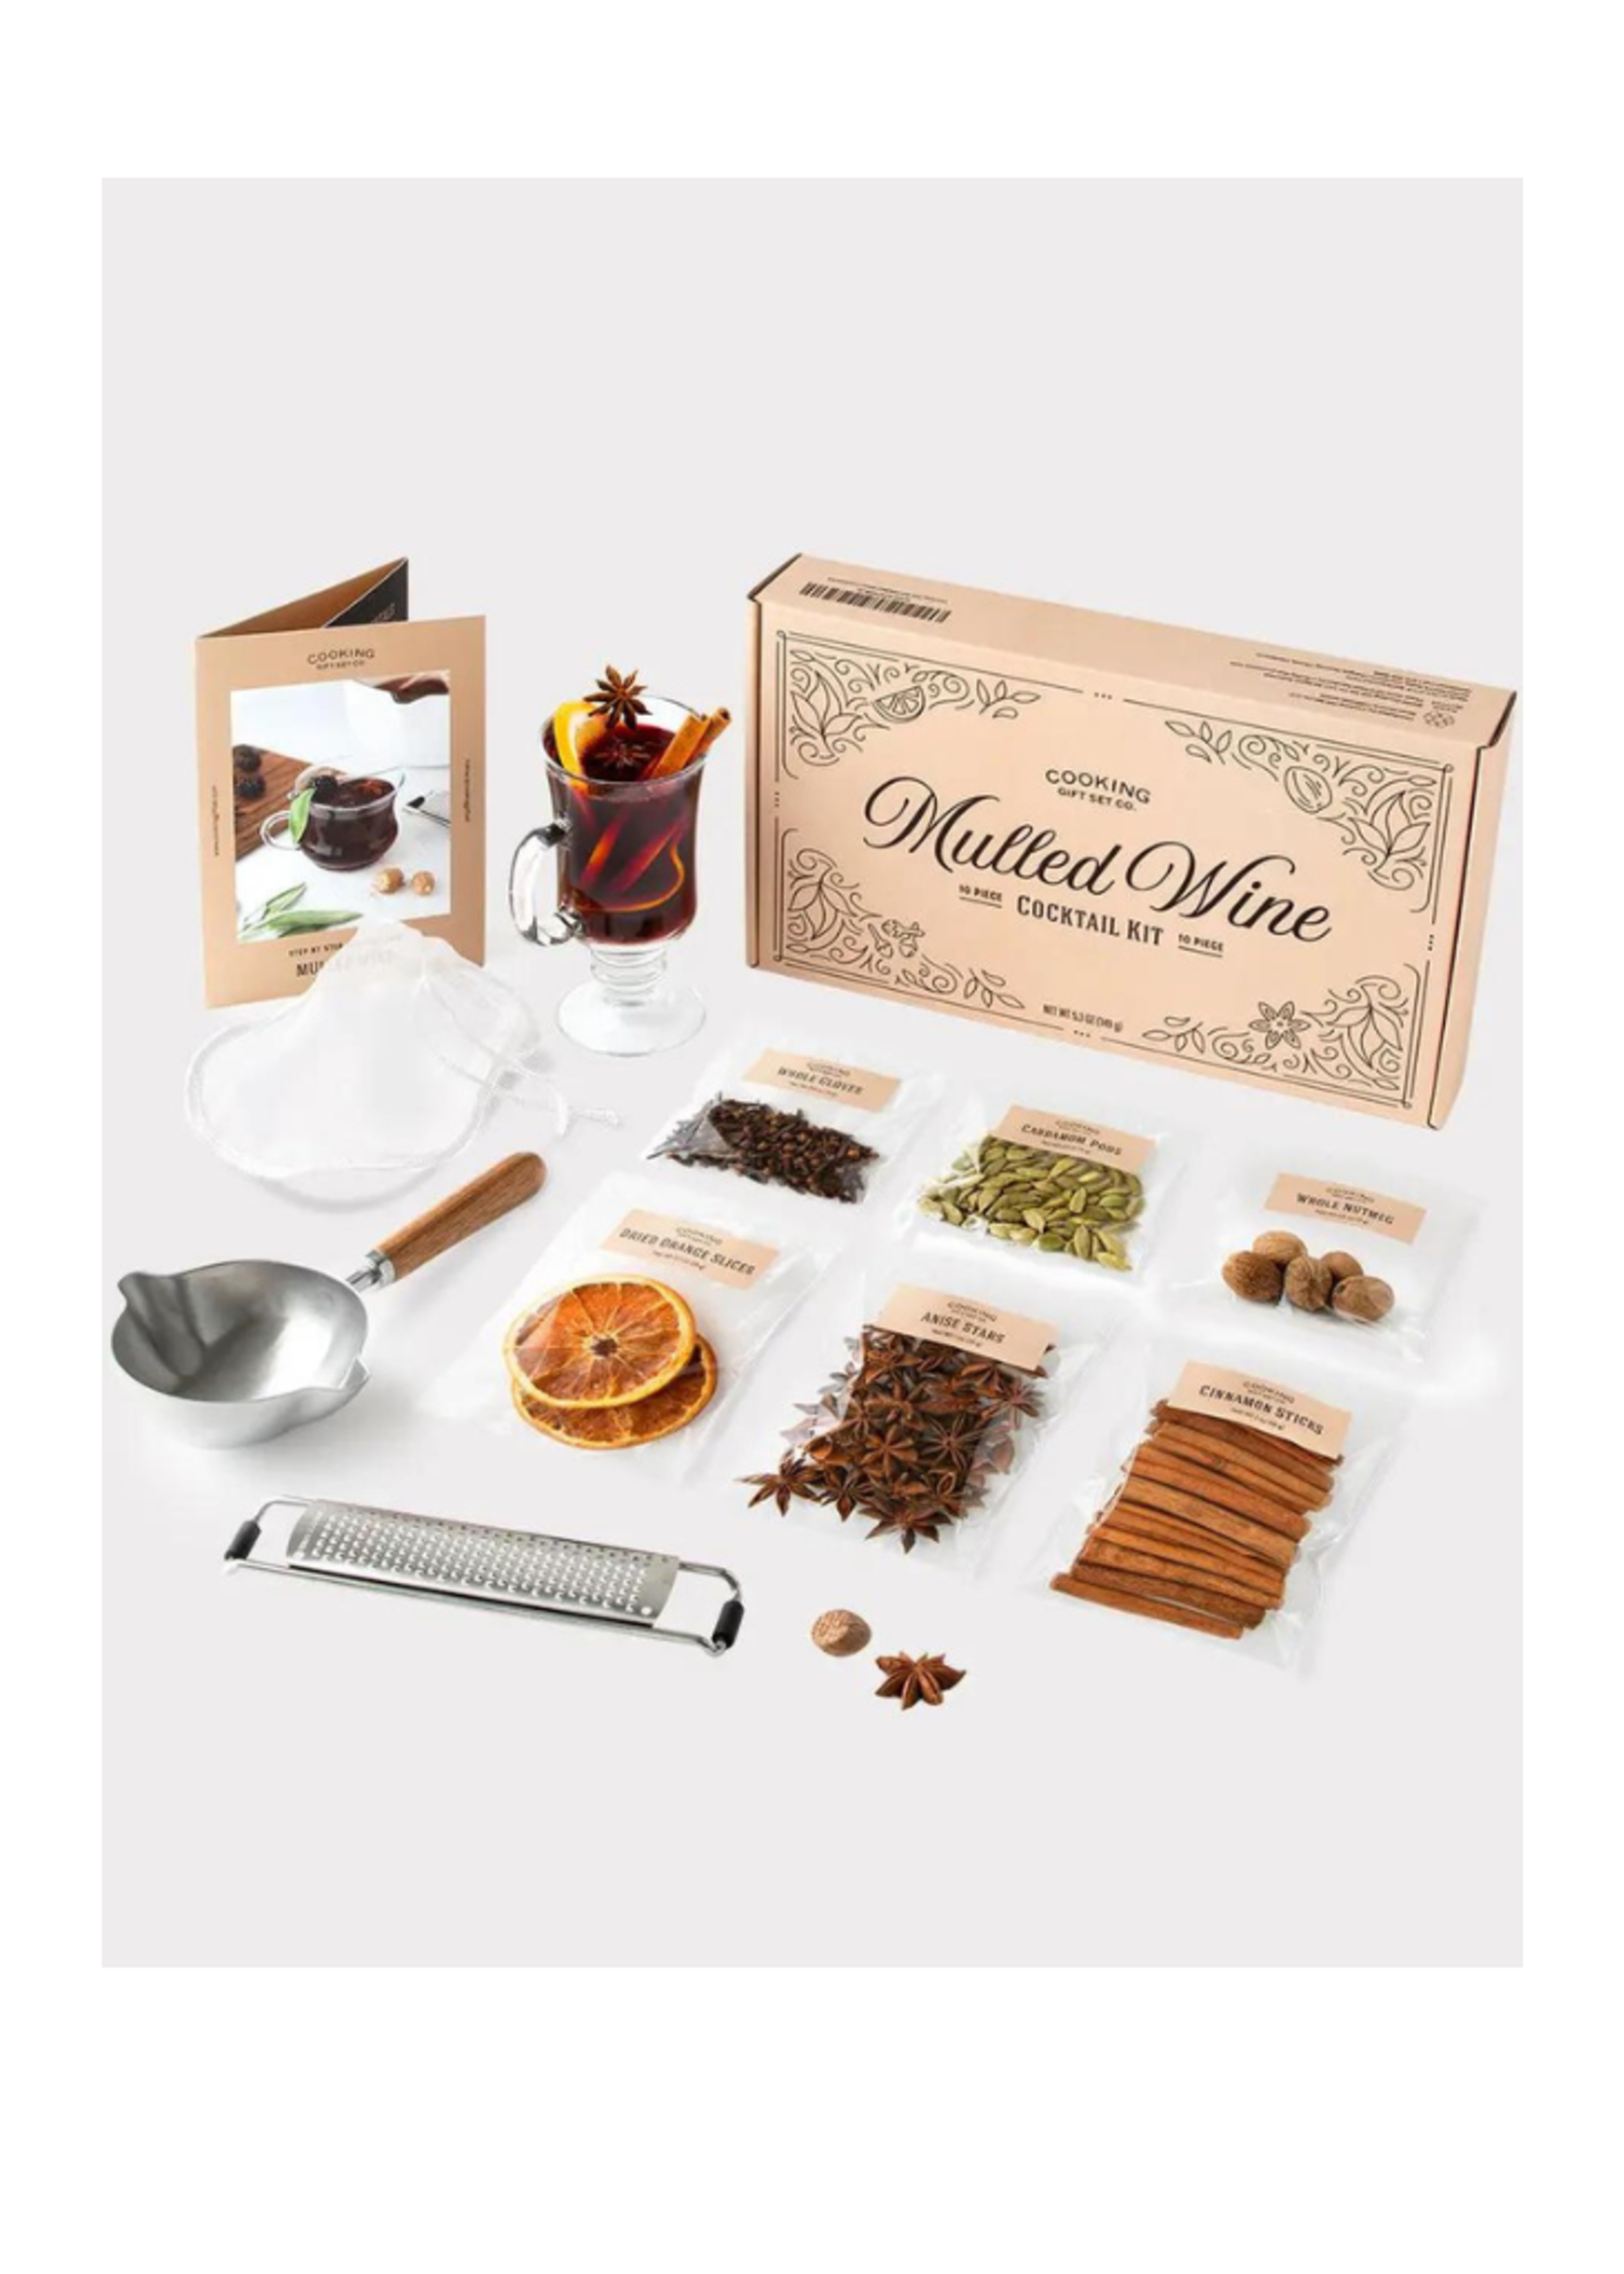 Cooking Gift Set Co. Mulled Wine Cocktail Kit